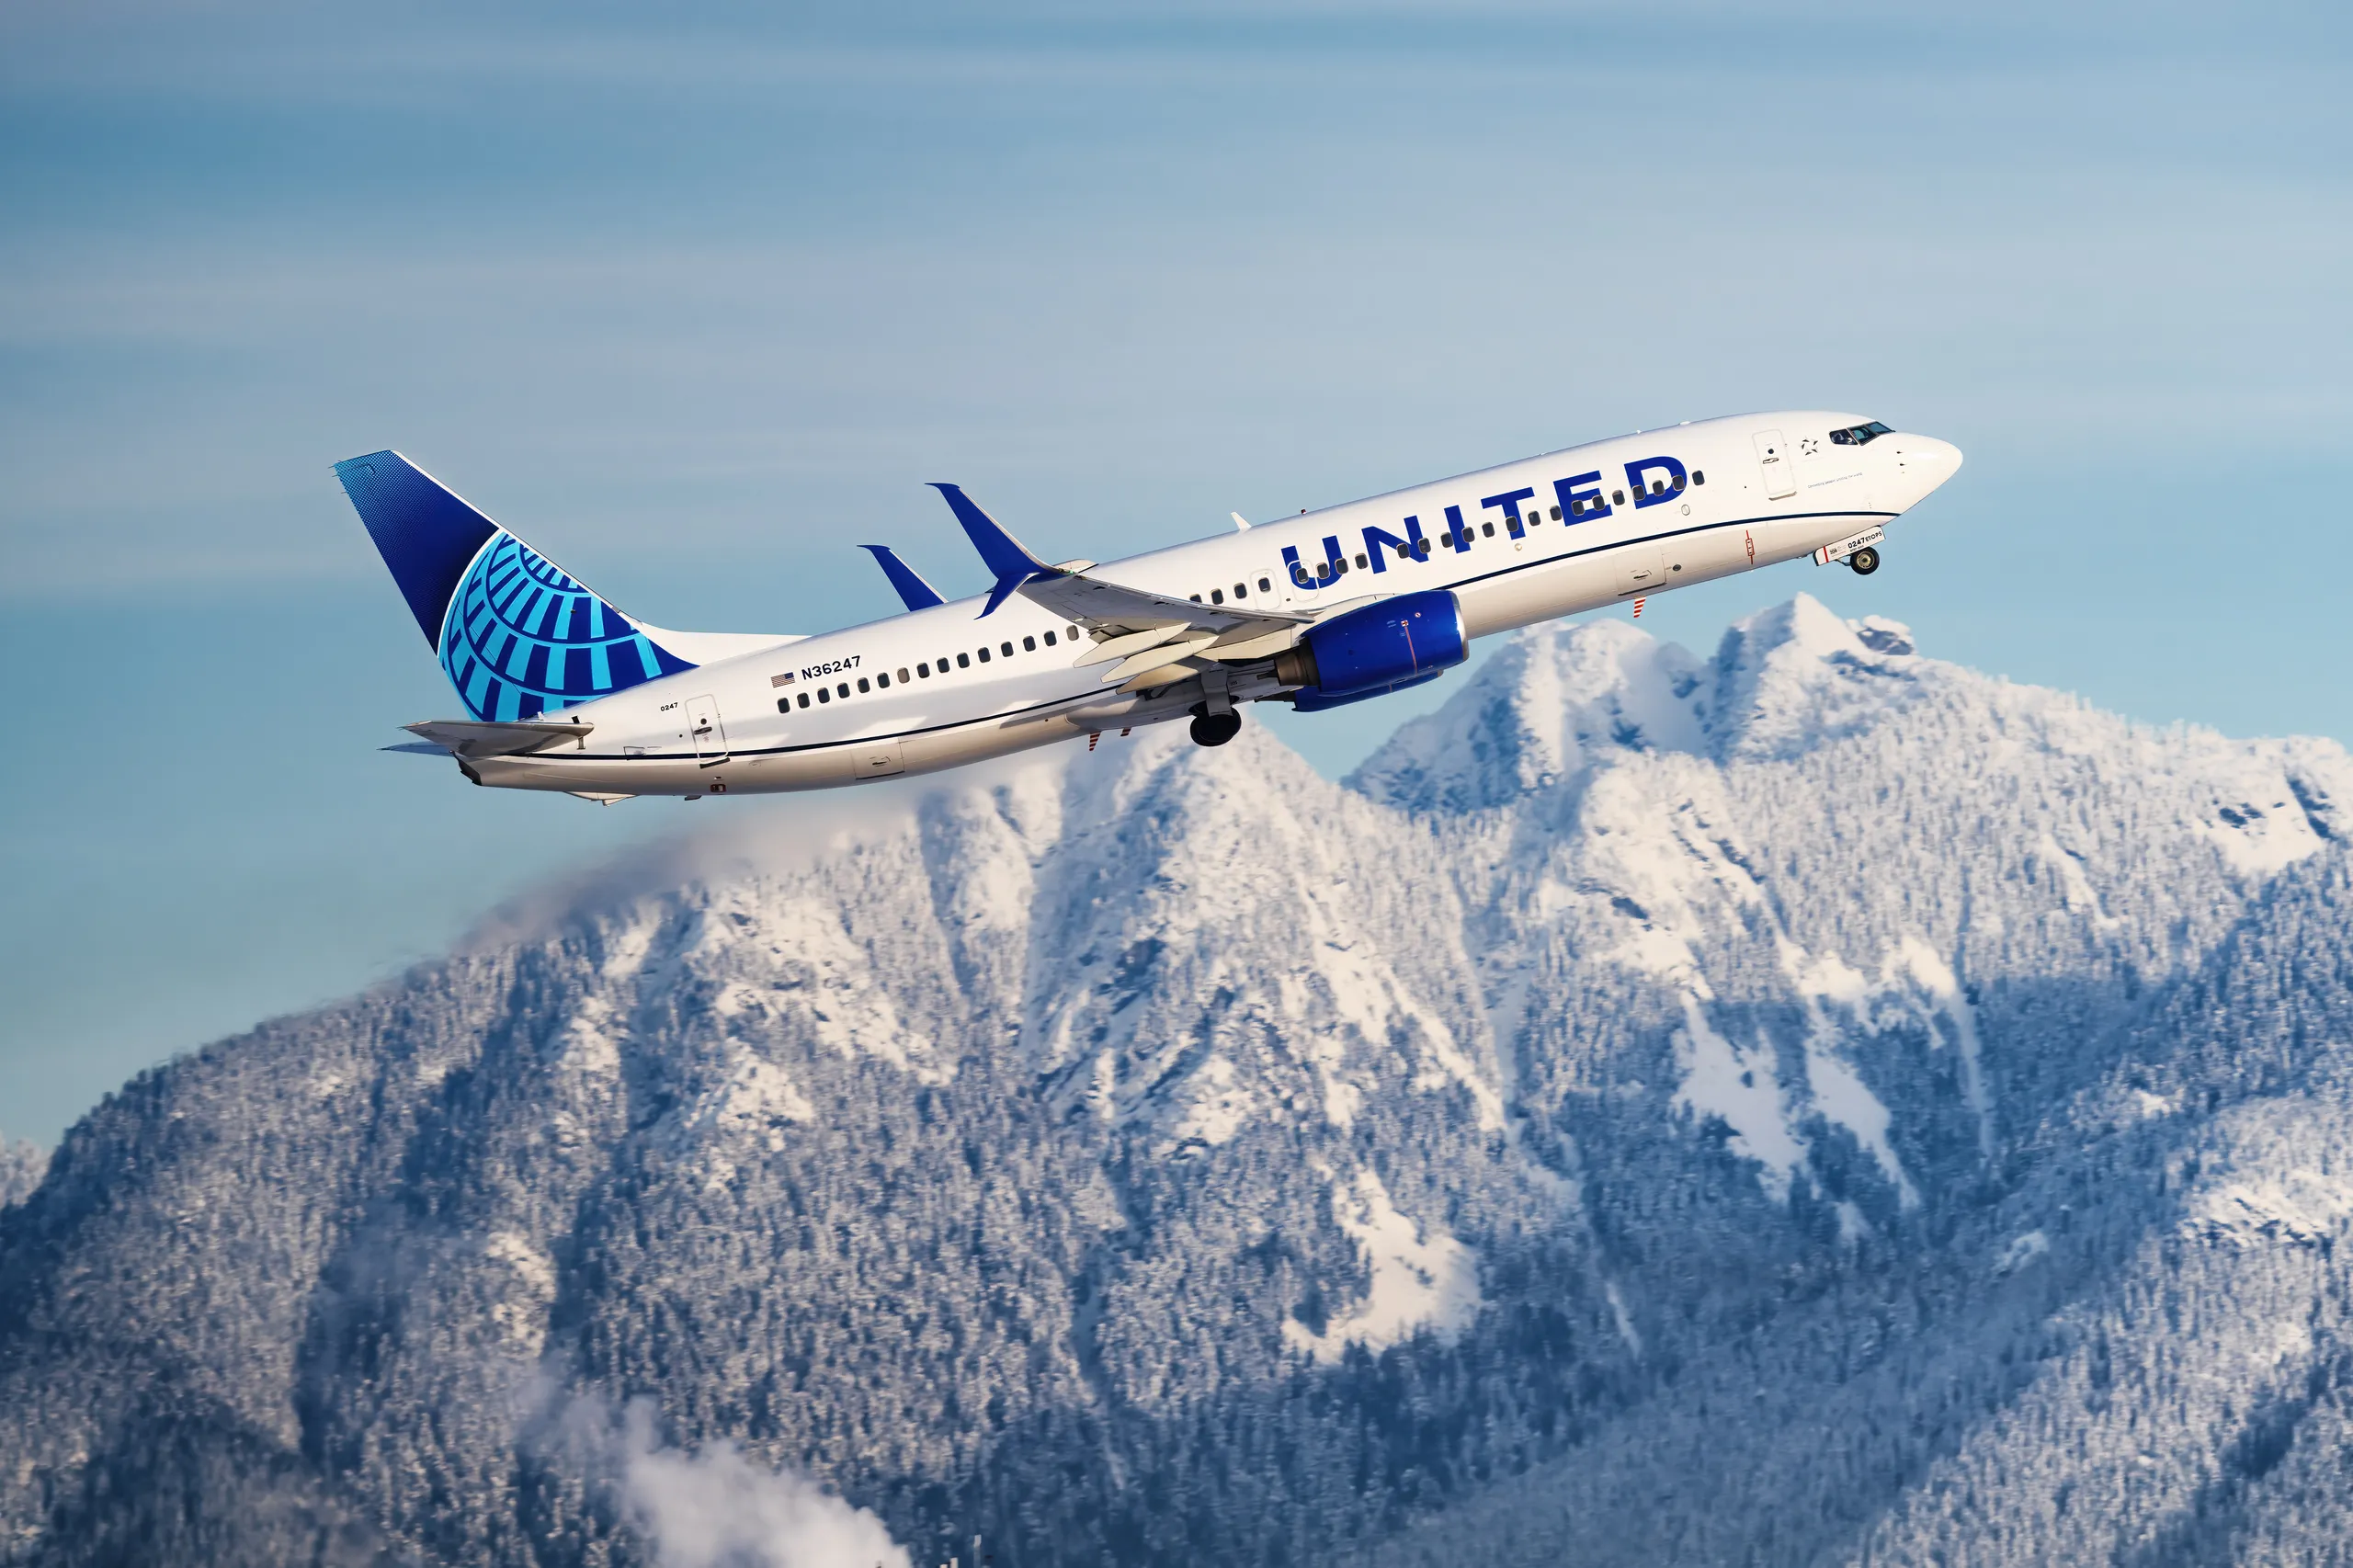 
United Airlines: The Ultimate List of Mergers and Acquisitions That Shaped the Airline Industry